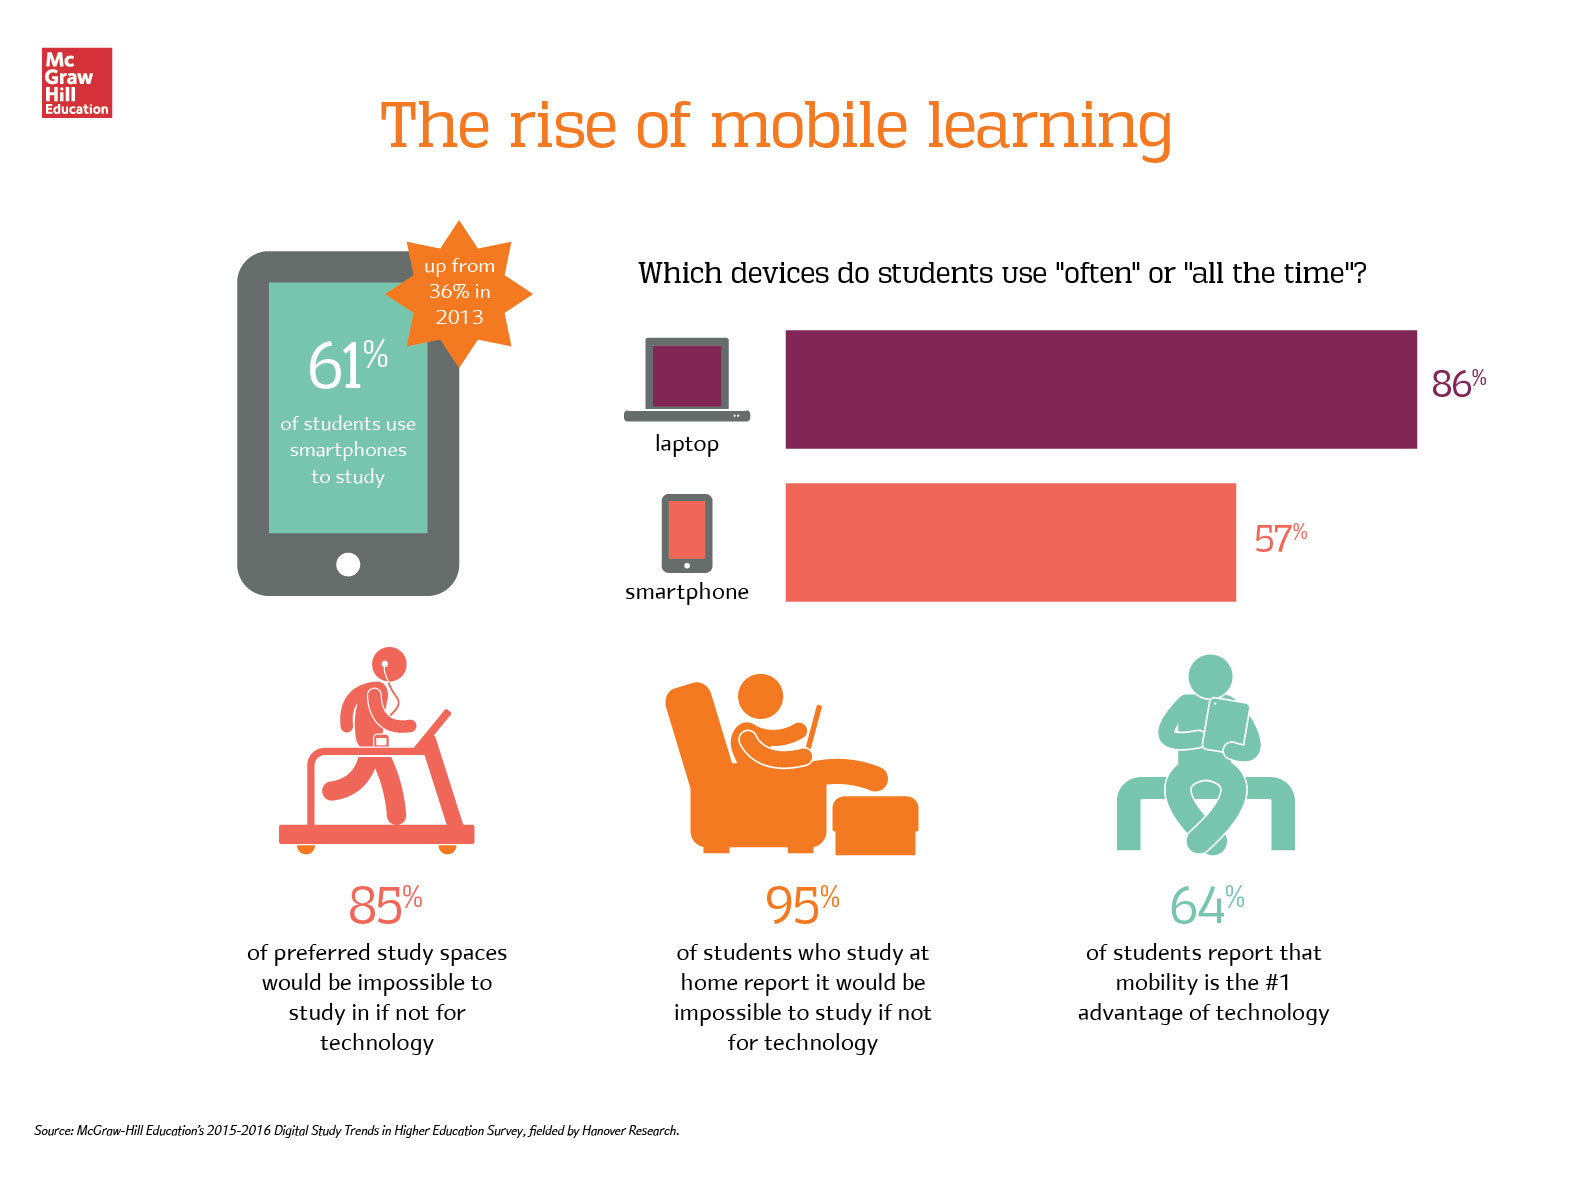 The rise of mobile learning infographic